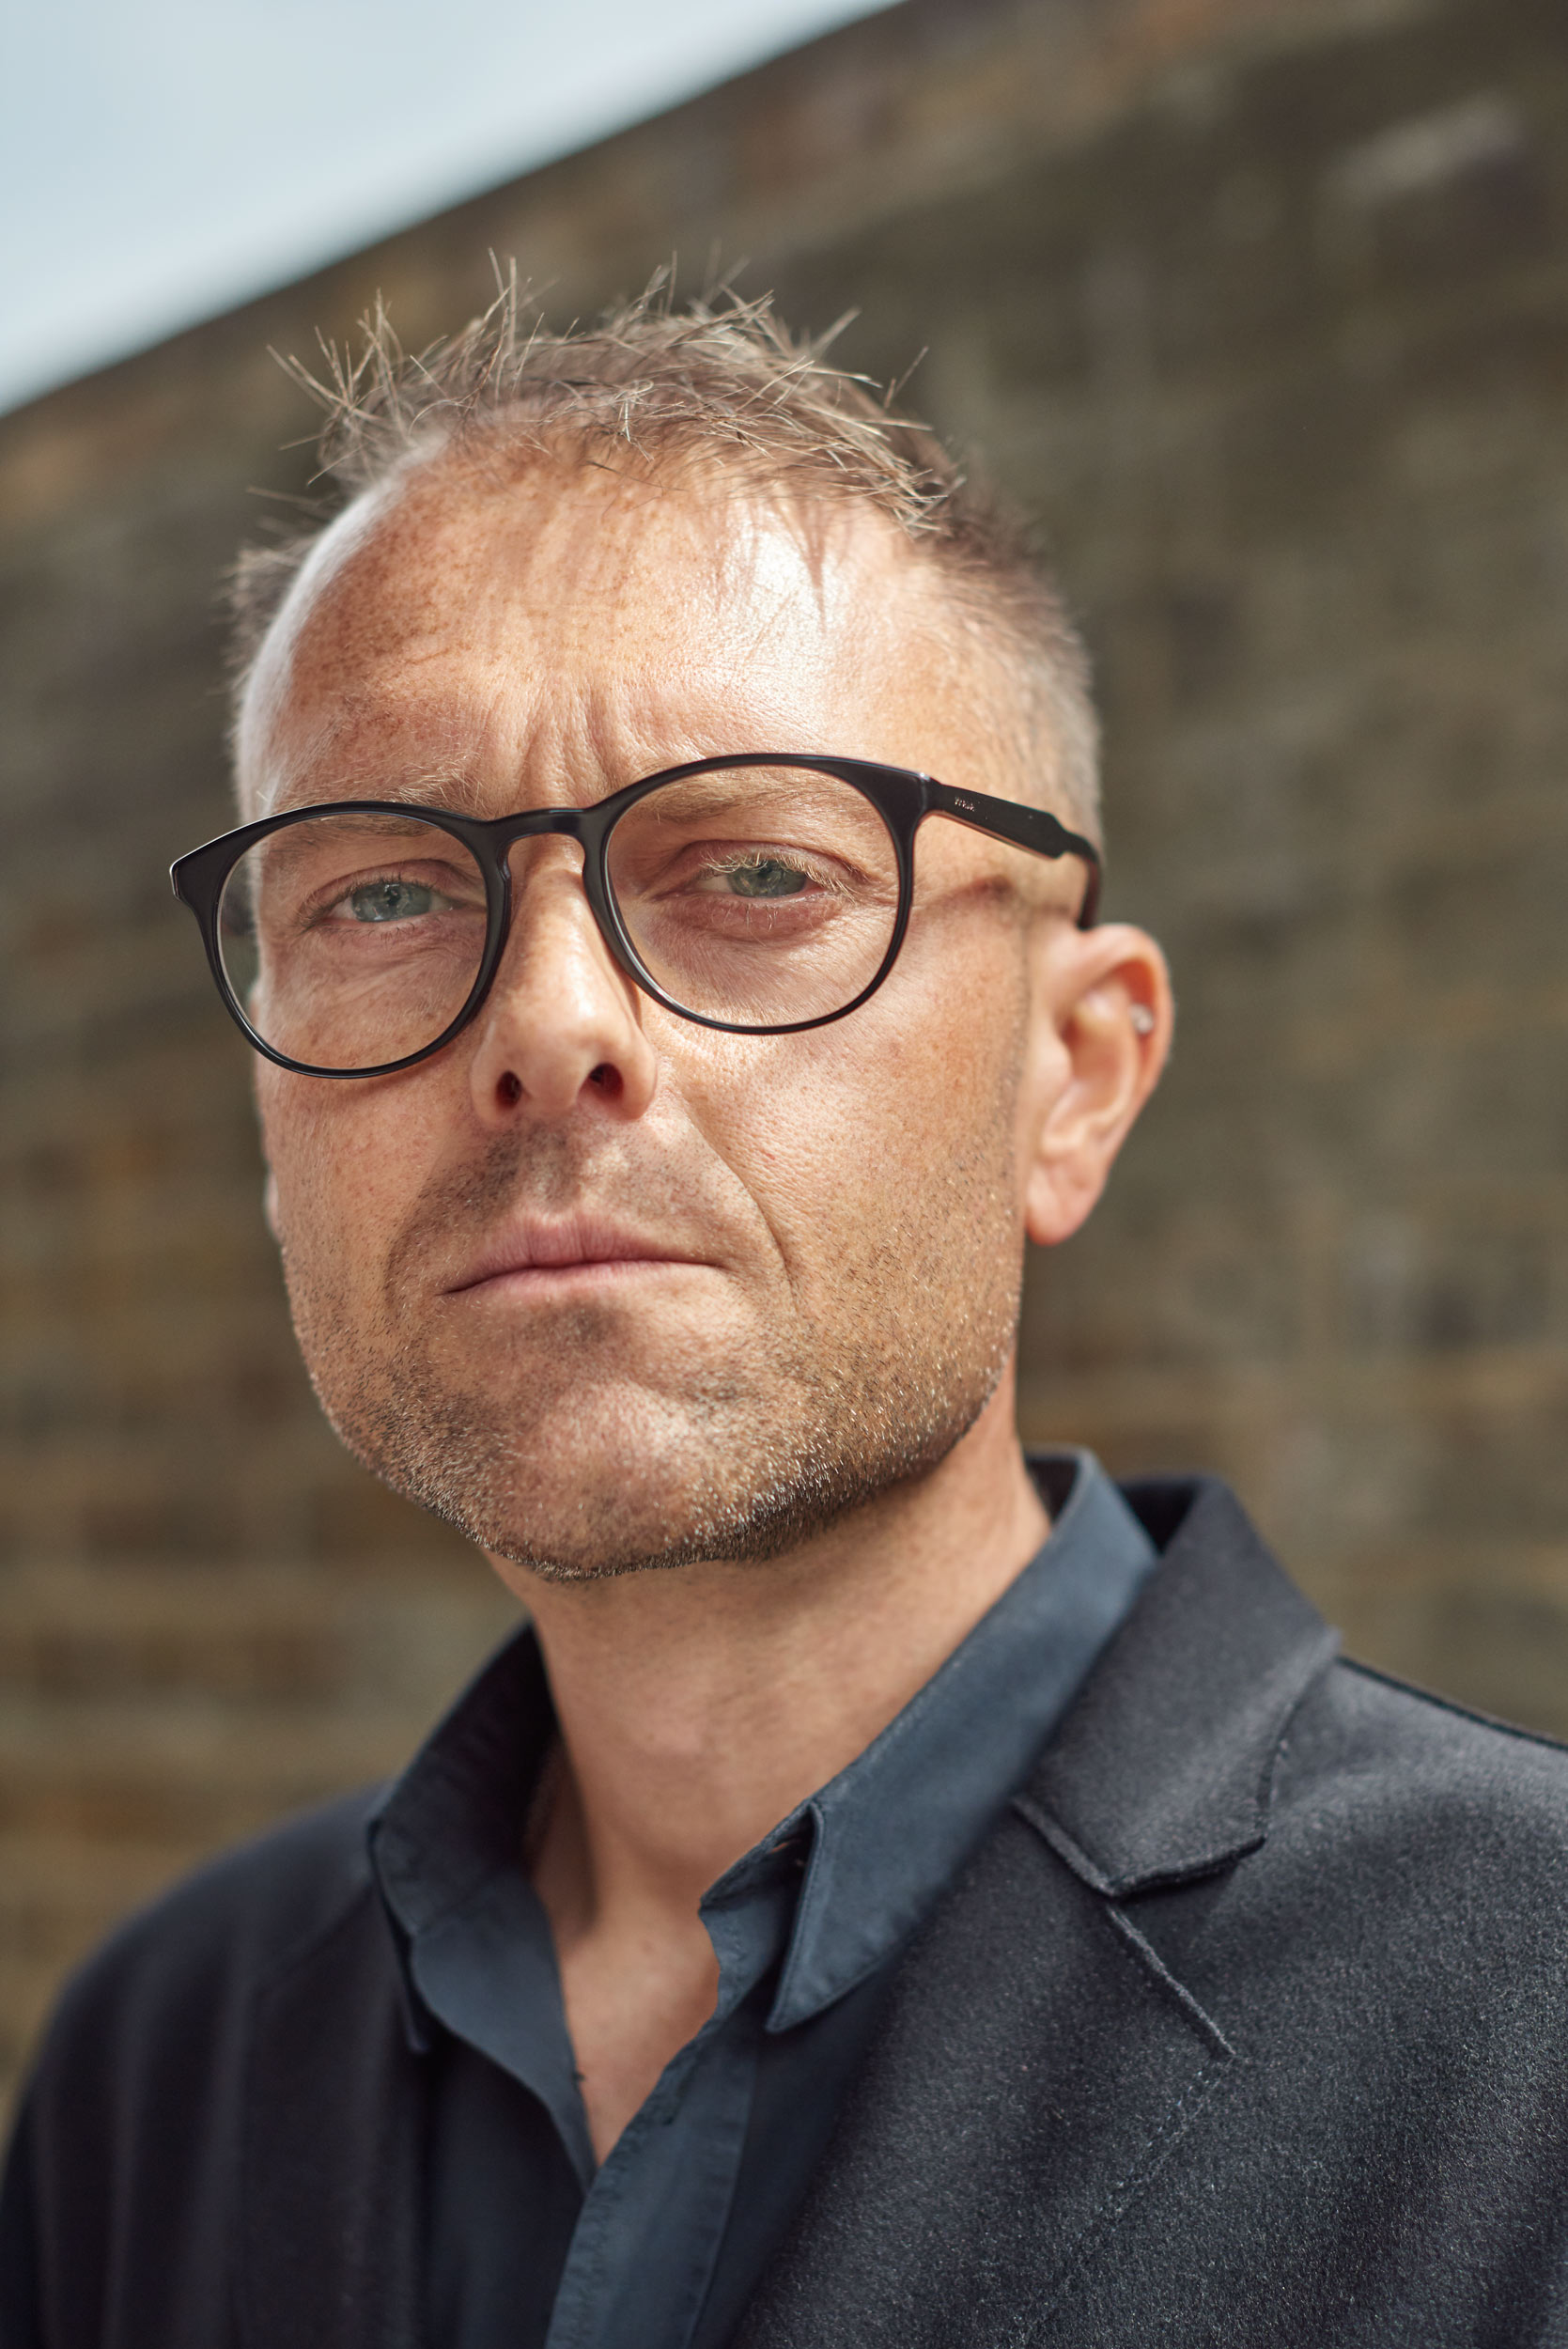 CEO DAVE-POSES-FOR-A-PORTRAIT-FOR-MAGAZINE-WEBSITE-IN-LONDON